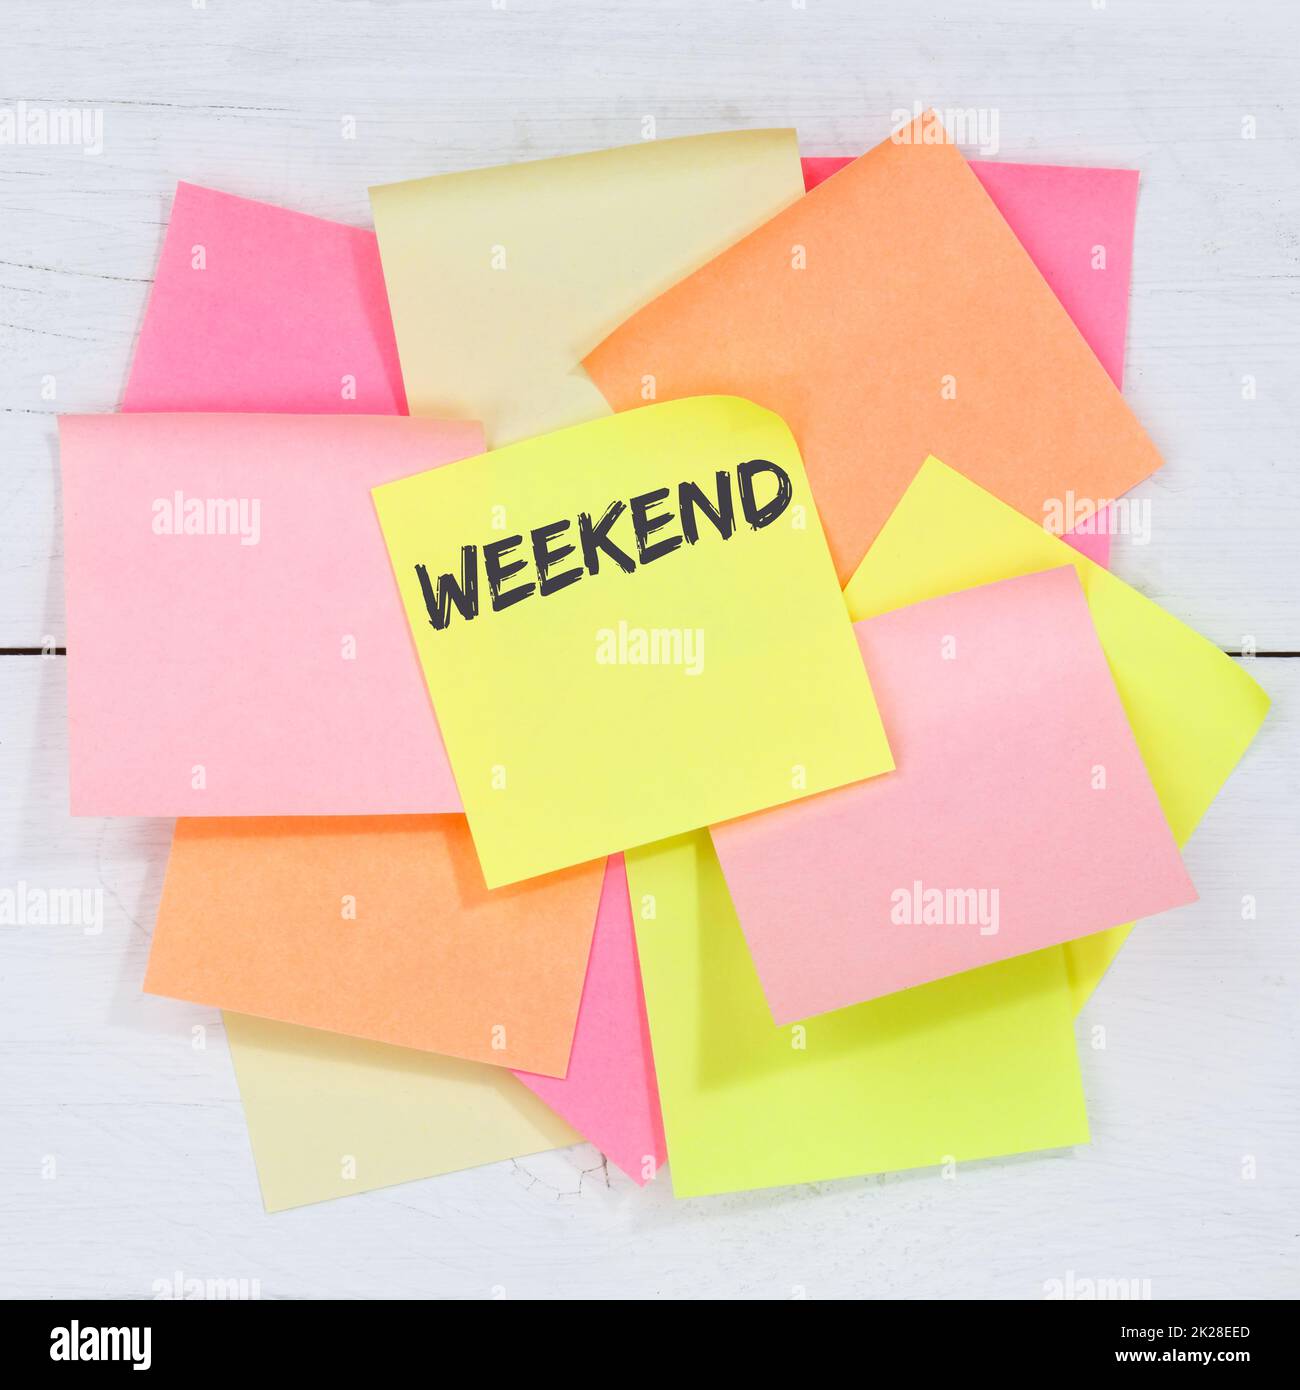 Weekend relax relaxed break business concept free time freetime leisure desk note paper Stock Photo